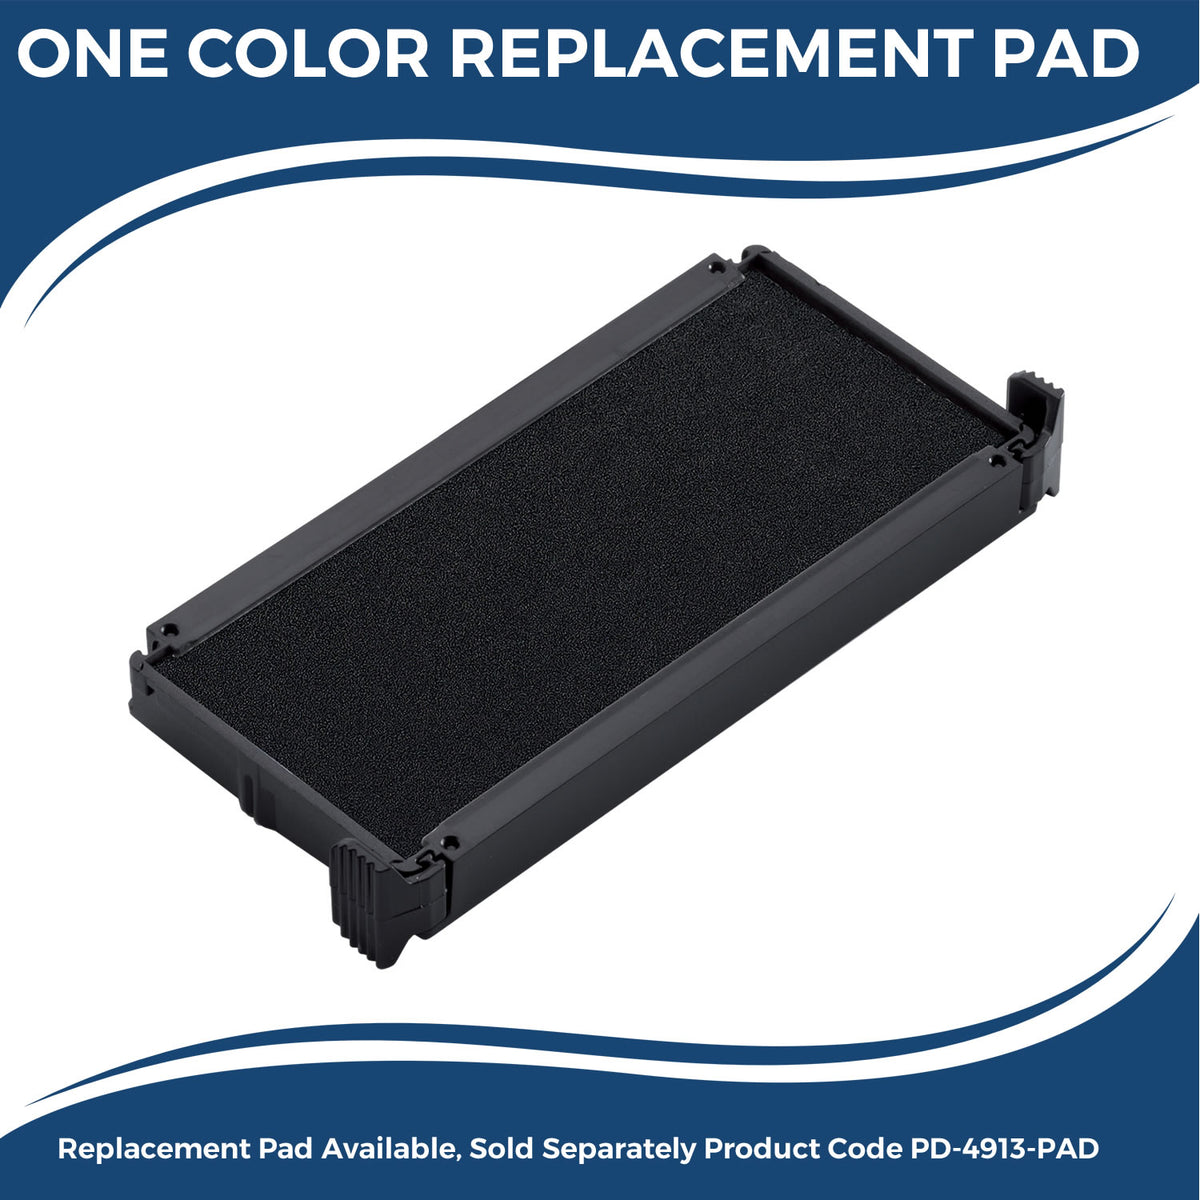 Large Self-Inking Bold Distributed Stamp 4880S Large Replacment Pad